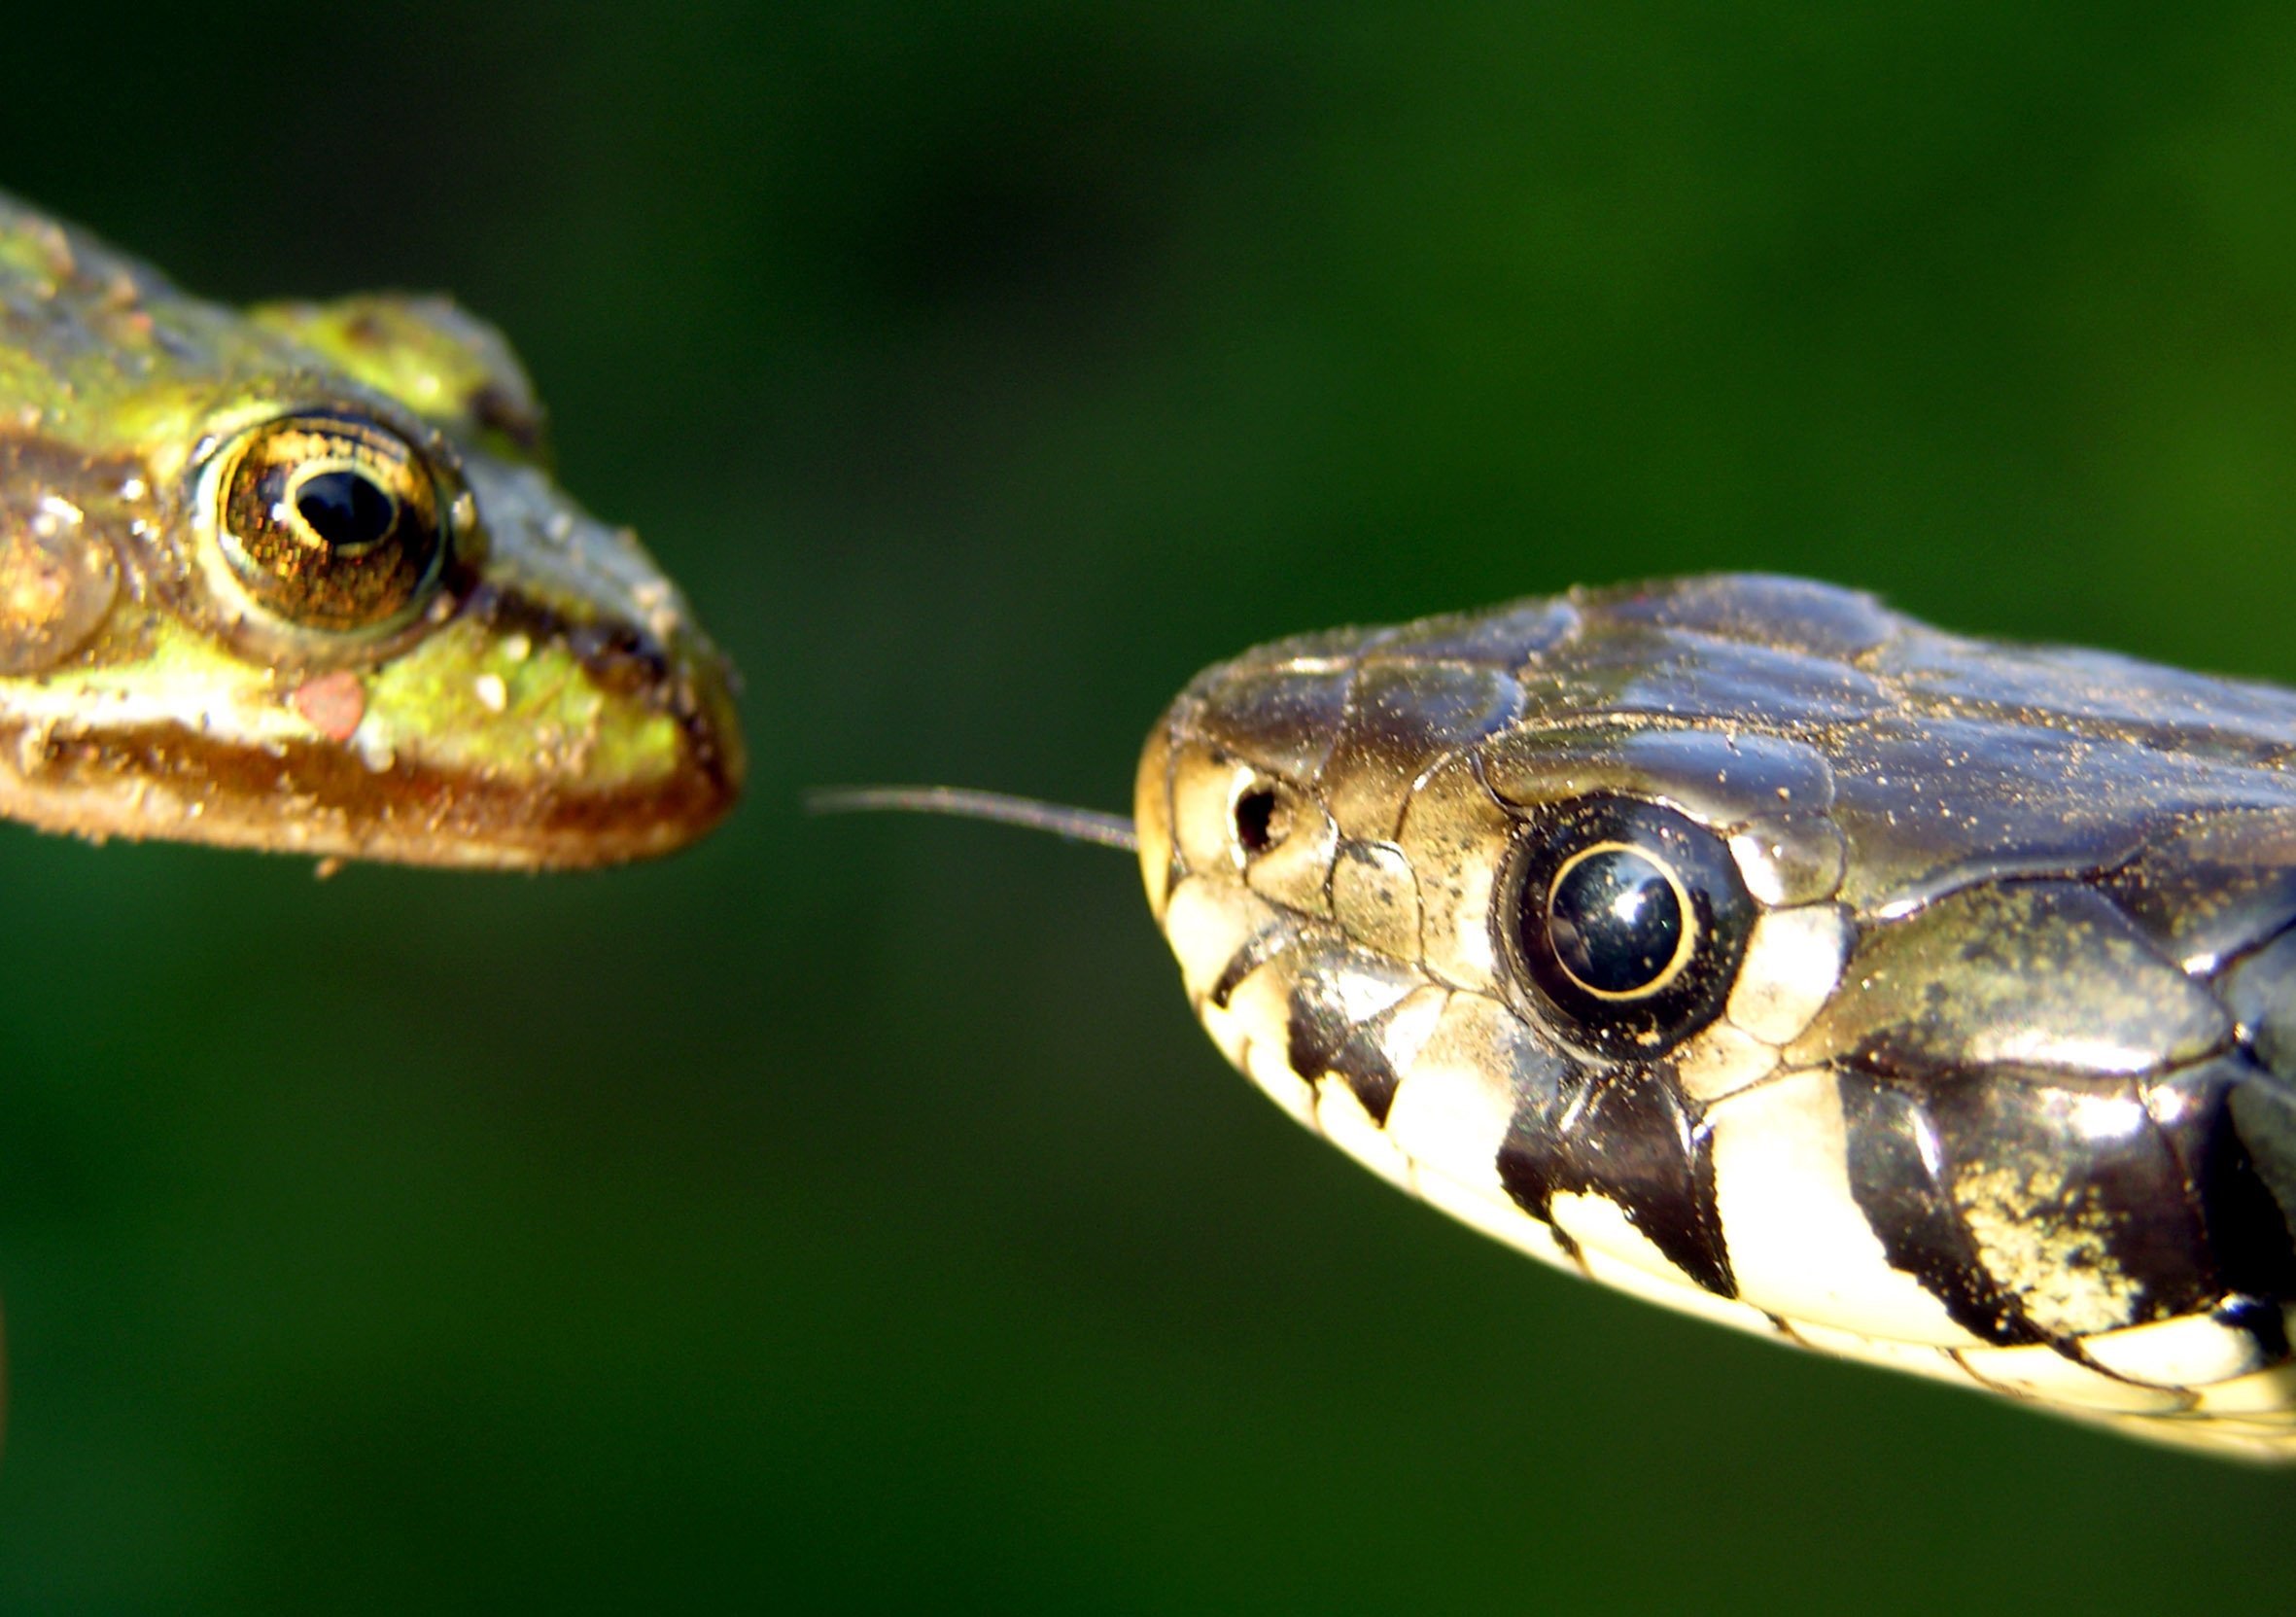 A New Species Of Snake Has Been Discovered In The UK - LADbible